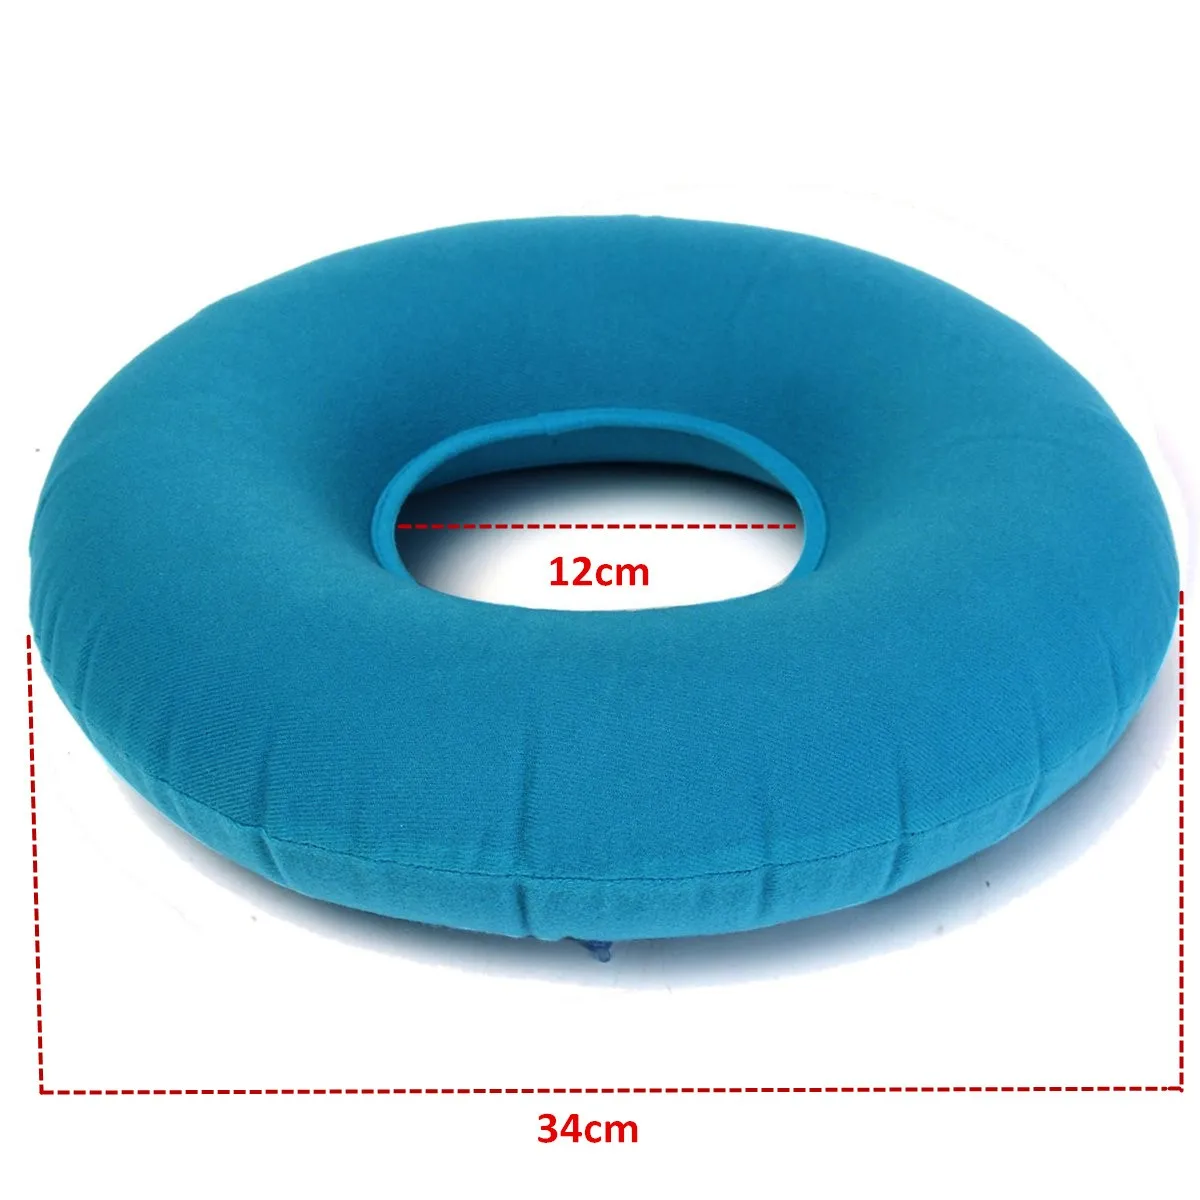 Donut Cushion Seat, Portable Inflatable Ring Cushion For Hemorrhoid,  Tailbone, Coccyx Pain Relief - Air Pump Included